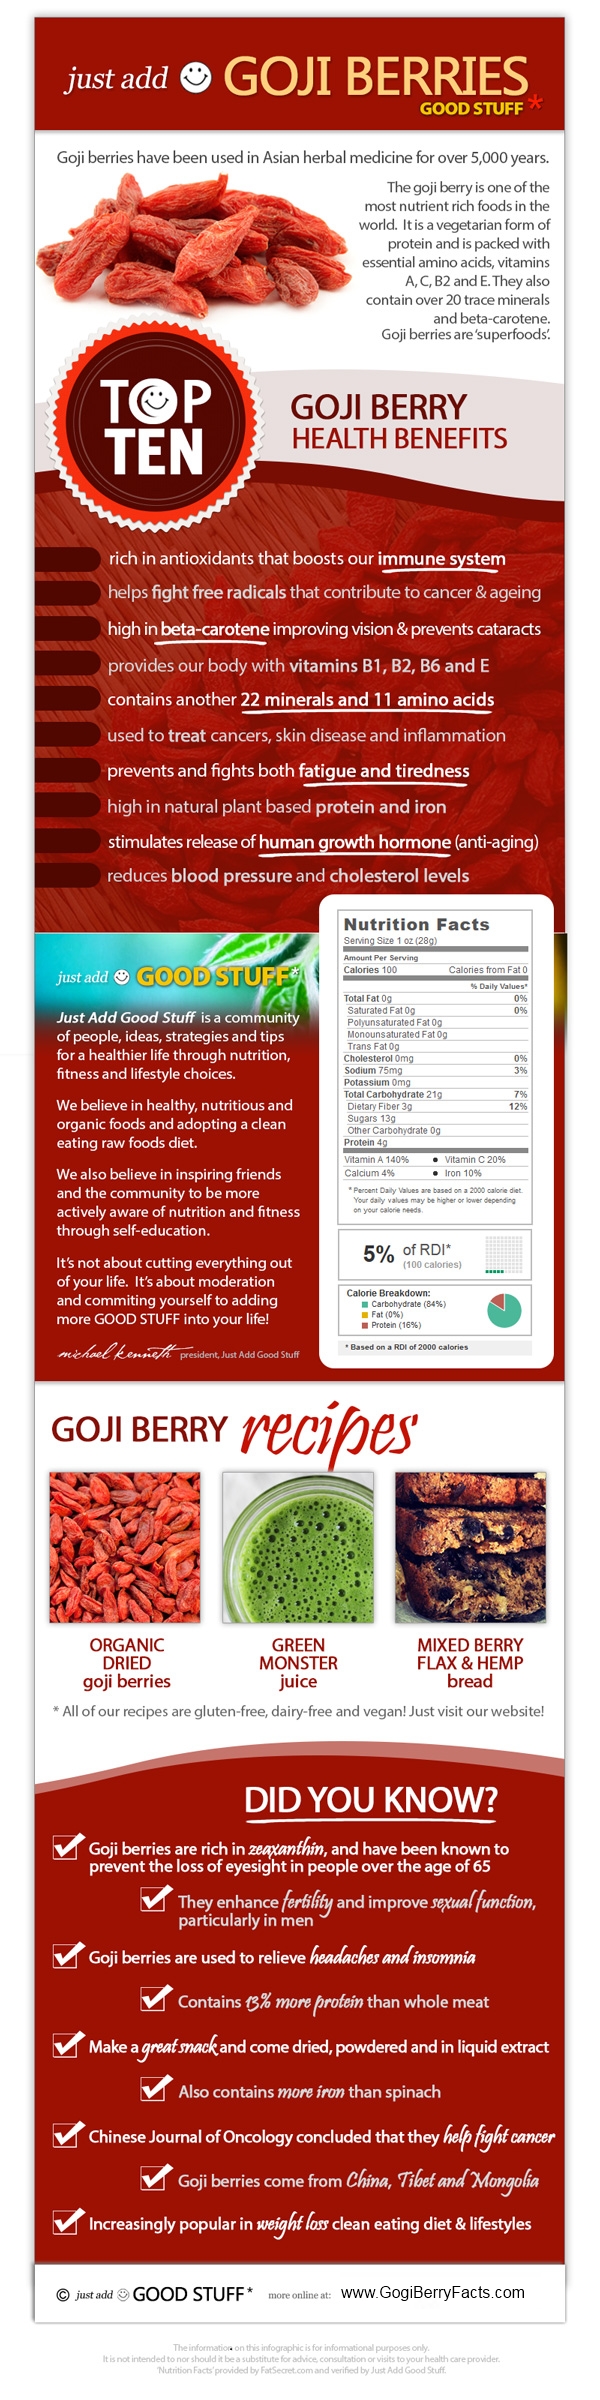 The Unlimited Health Benefits Of Goji Berries Infographic